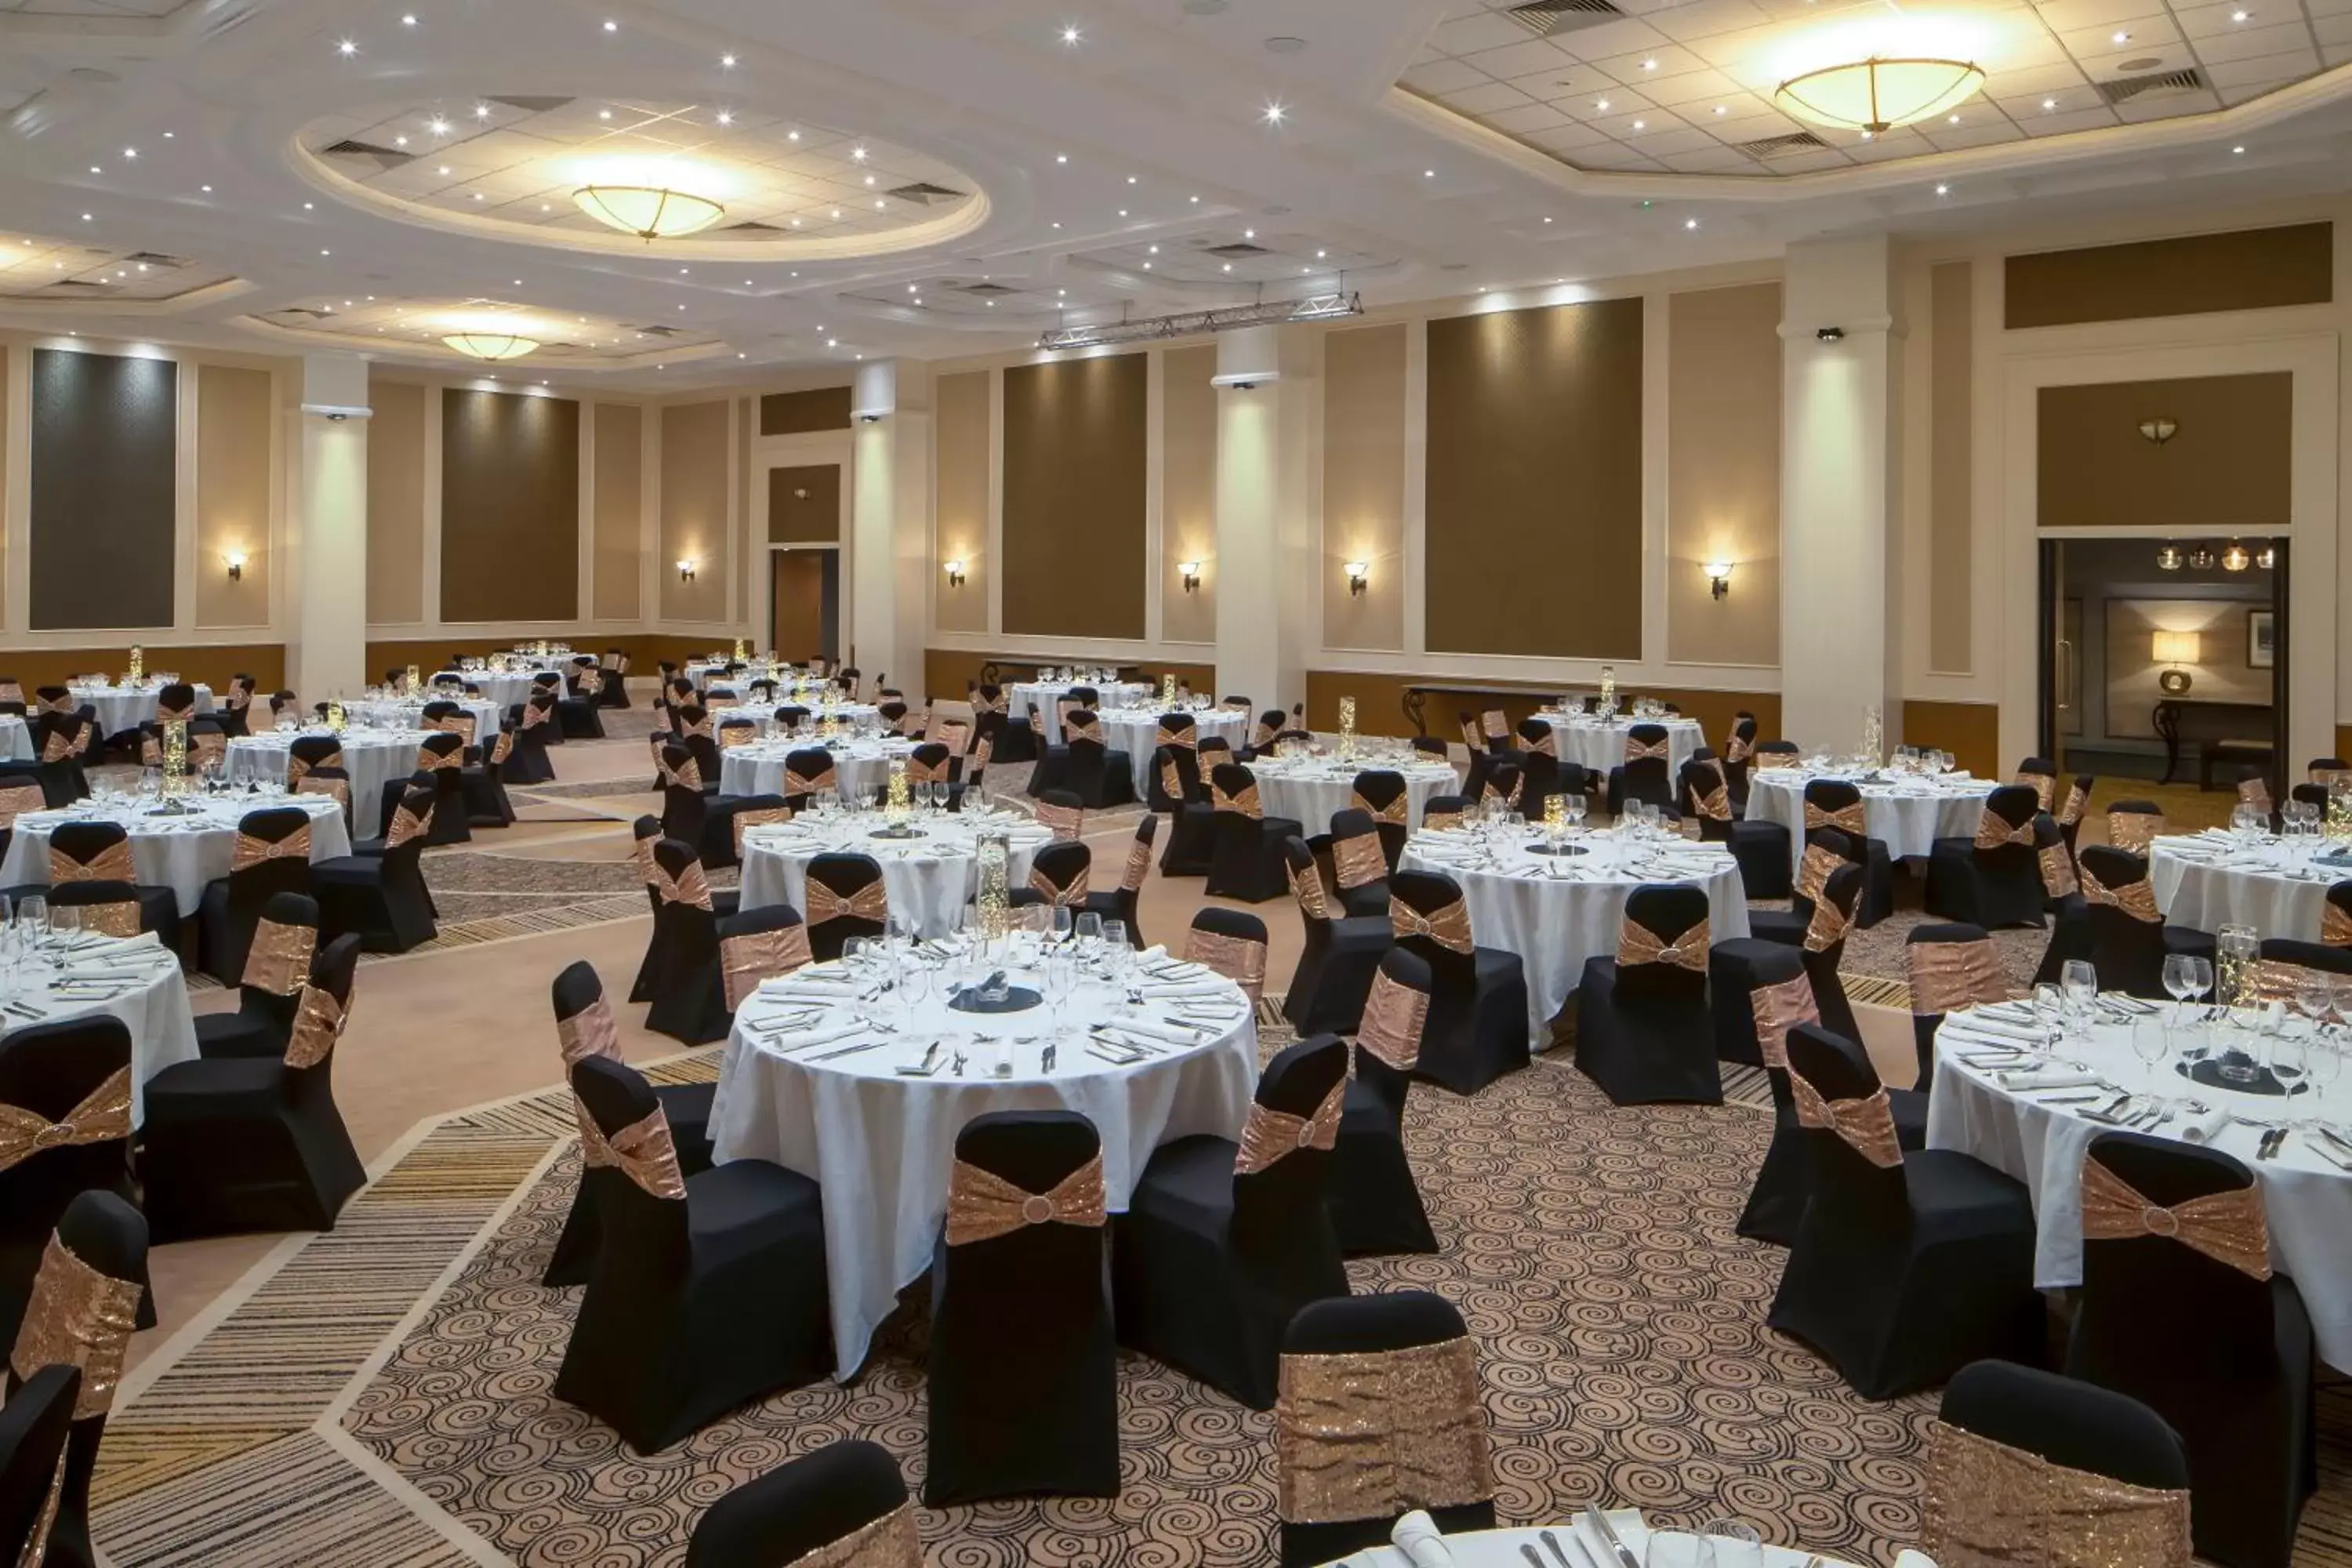 Banquet/Function facilities, Banquet Facilities in Crowne Plaza Plymouth, an IHG Hotel